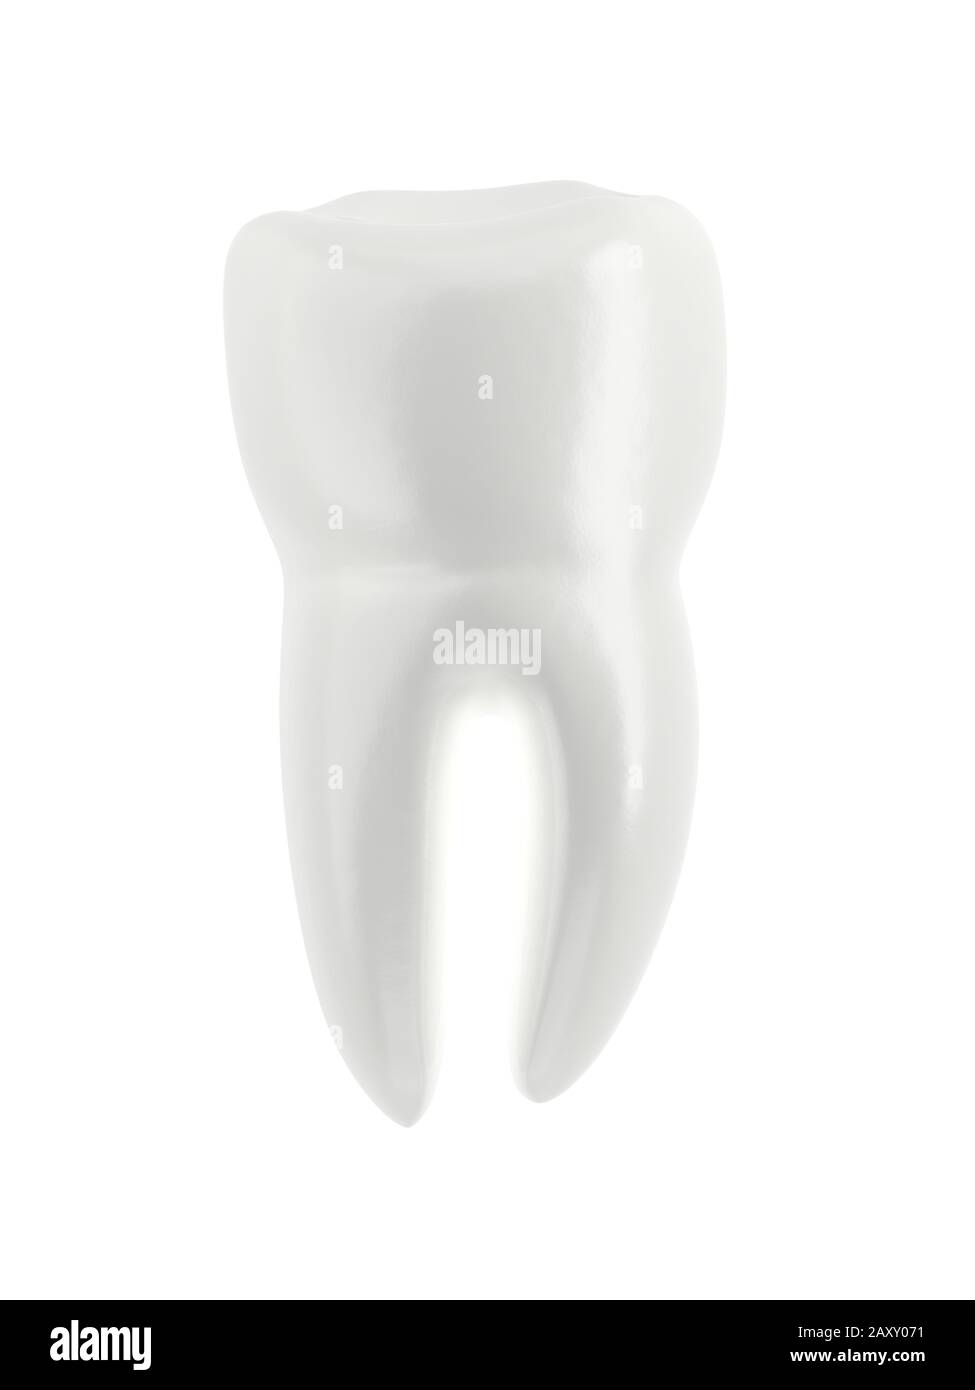 Molar tooth isolated on white background. 3d illustration. Single object. Stock Photo